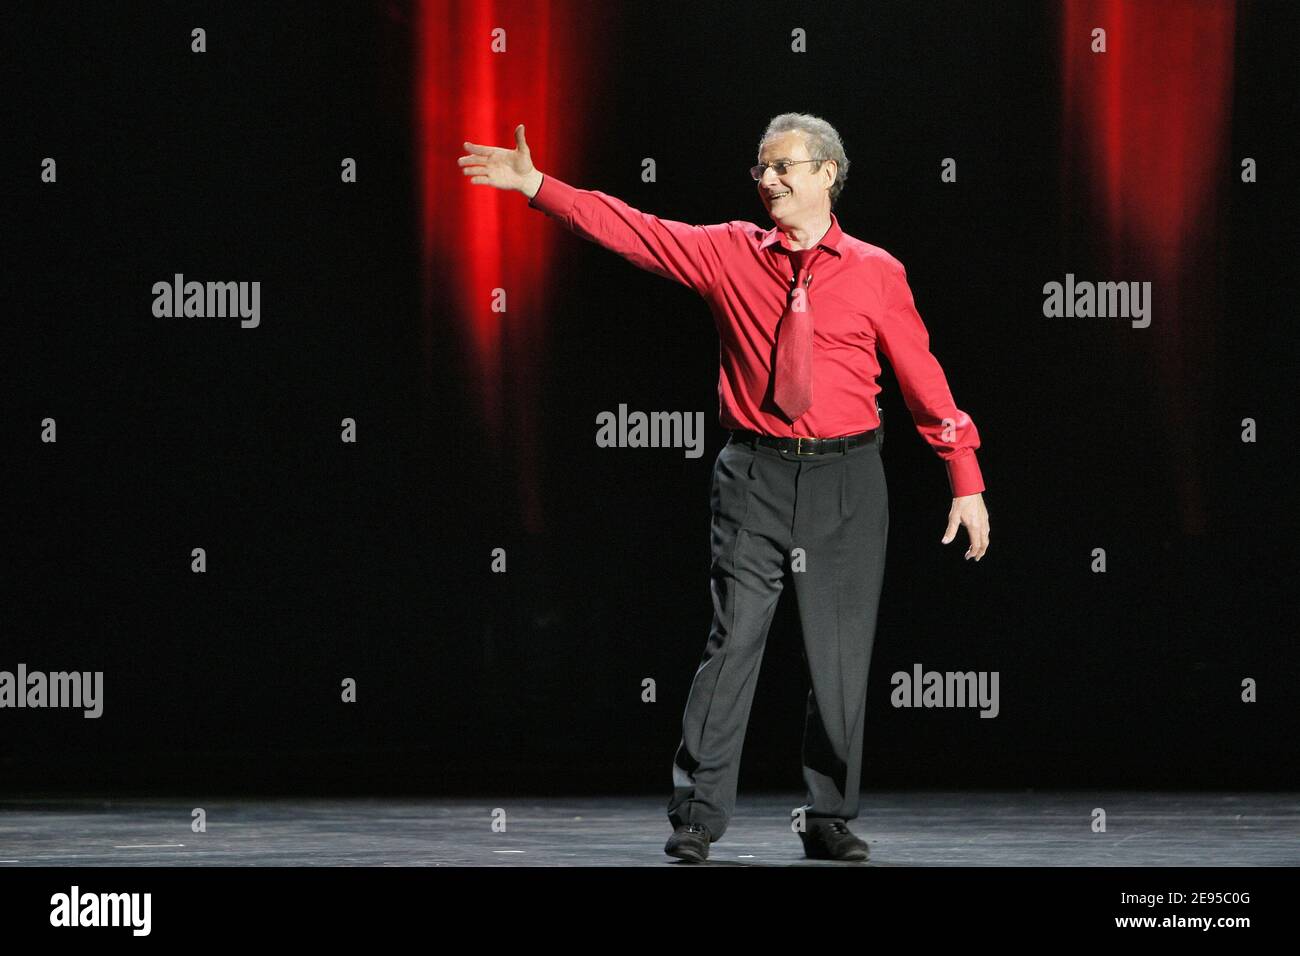 French humorist Daniel Prevost on stage during his last show at the Olympia in Paris, France on january 16, 2006. Photo by Thierry Orban/ABACAPRESS.COM Stock Photo